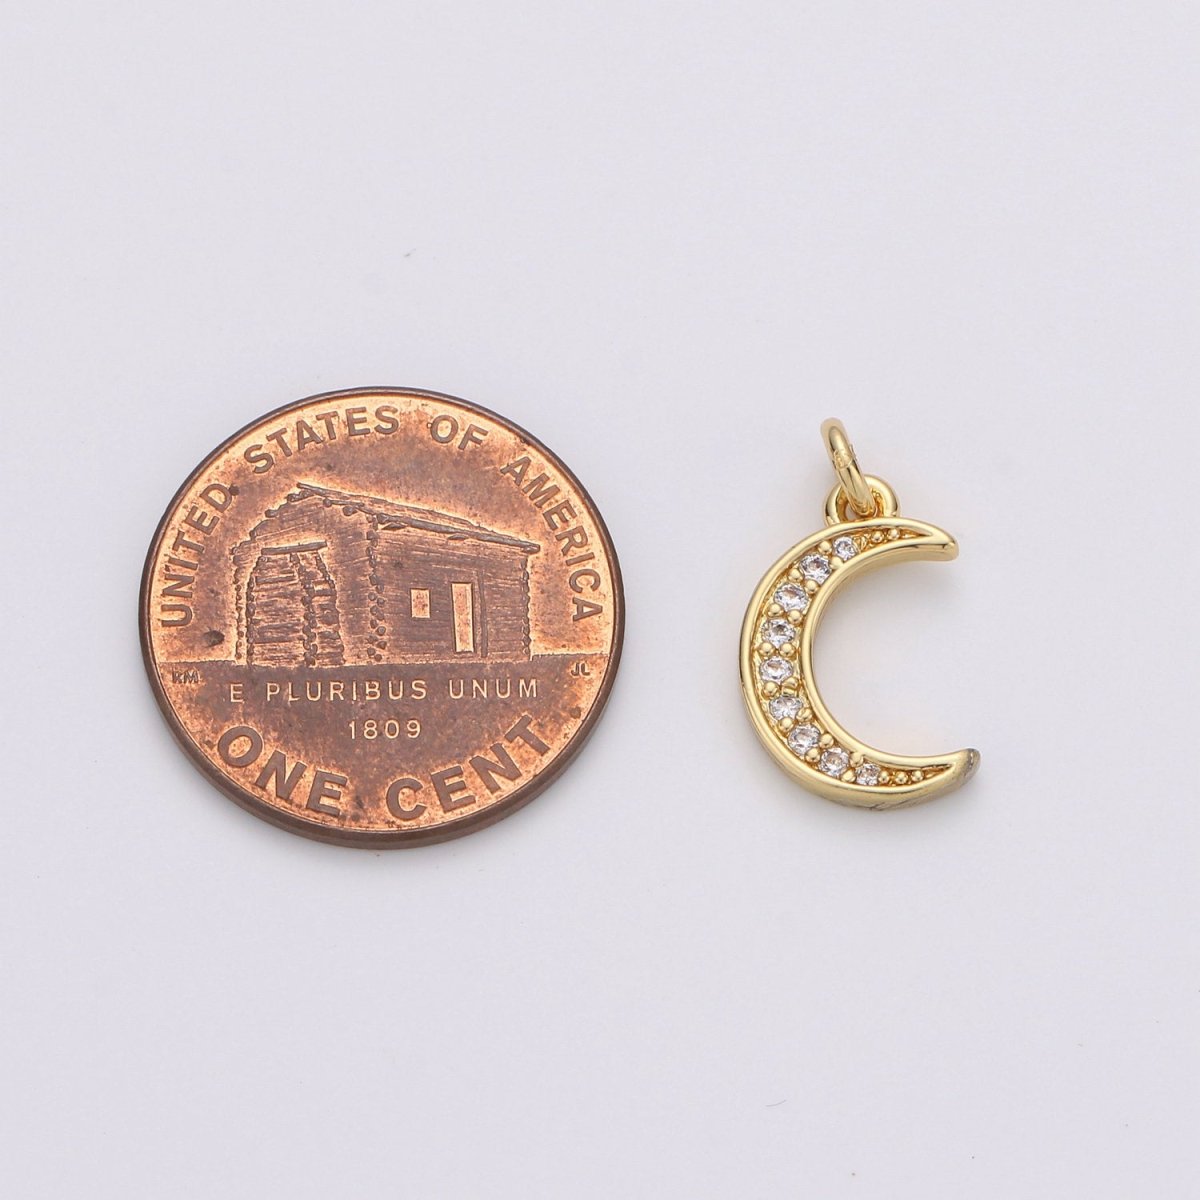 Dainty Crescent Tiny CZ Charm - Micro Pave Gold Moon Charm in 24k Gold Filled celestial Jewelry for Bracelet Earring Necklace Component D-505 - DLUXCA